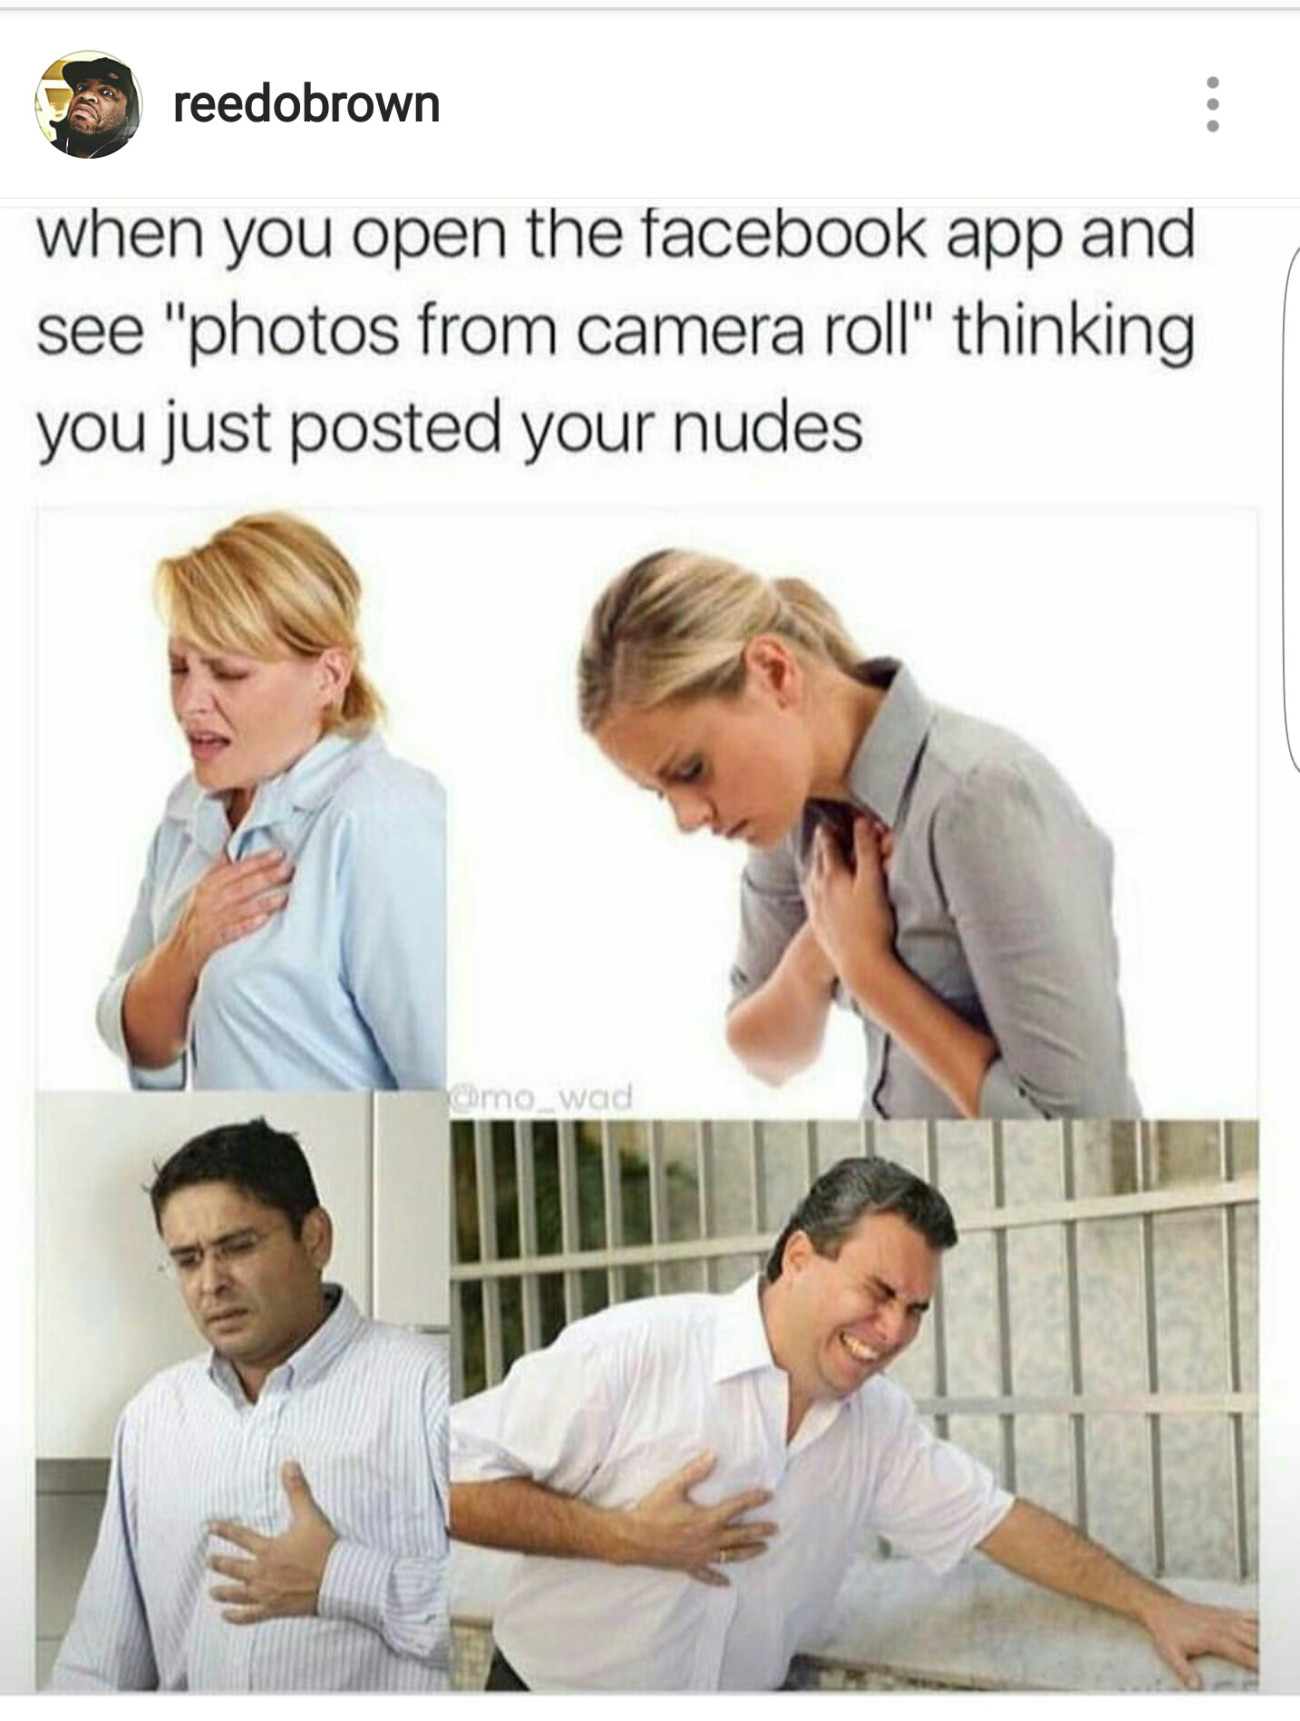 posting nudes meme - reedobrown when you open the facebook app and see "photos from camera roll" thinking you just posted your nudes Como wad